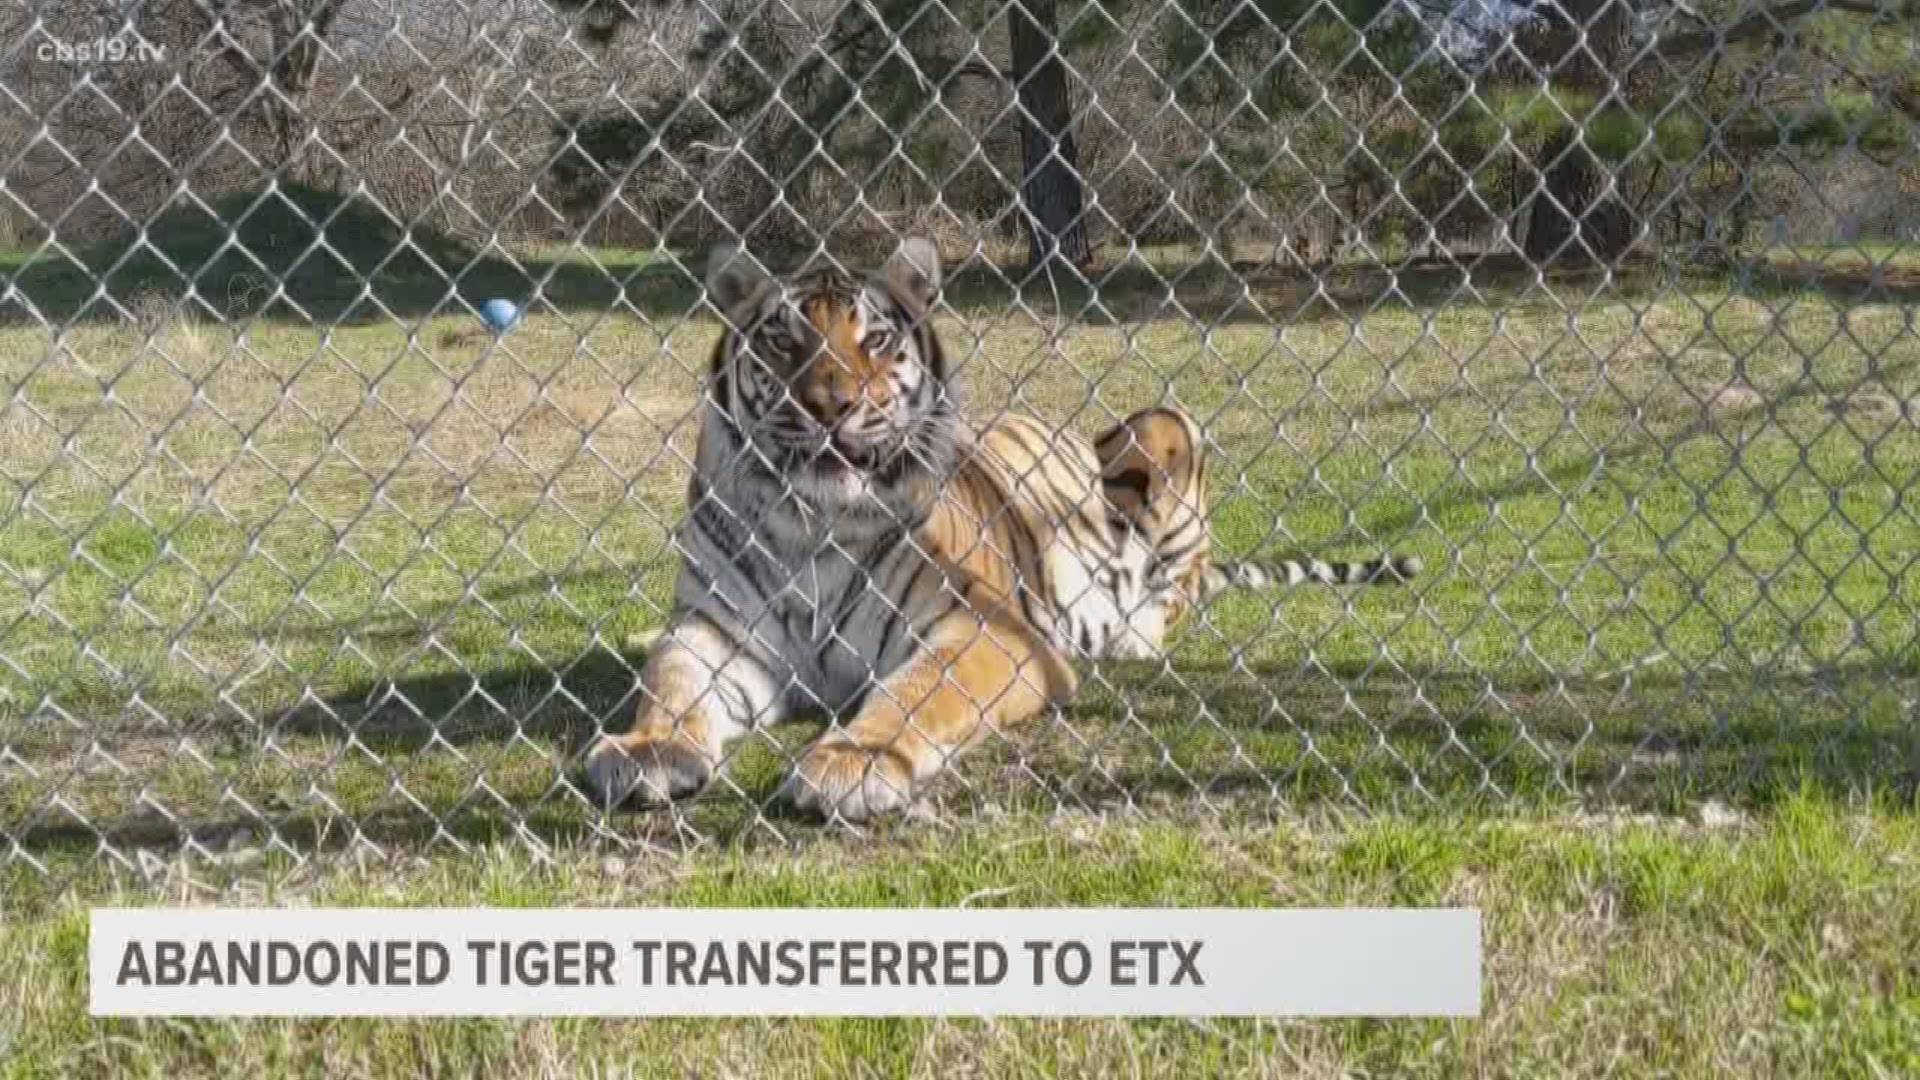 Two days after being found in an abandoned Houston house, a tiger is now being housed in an East Texas animal sanctuary.